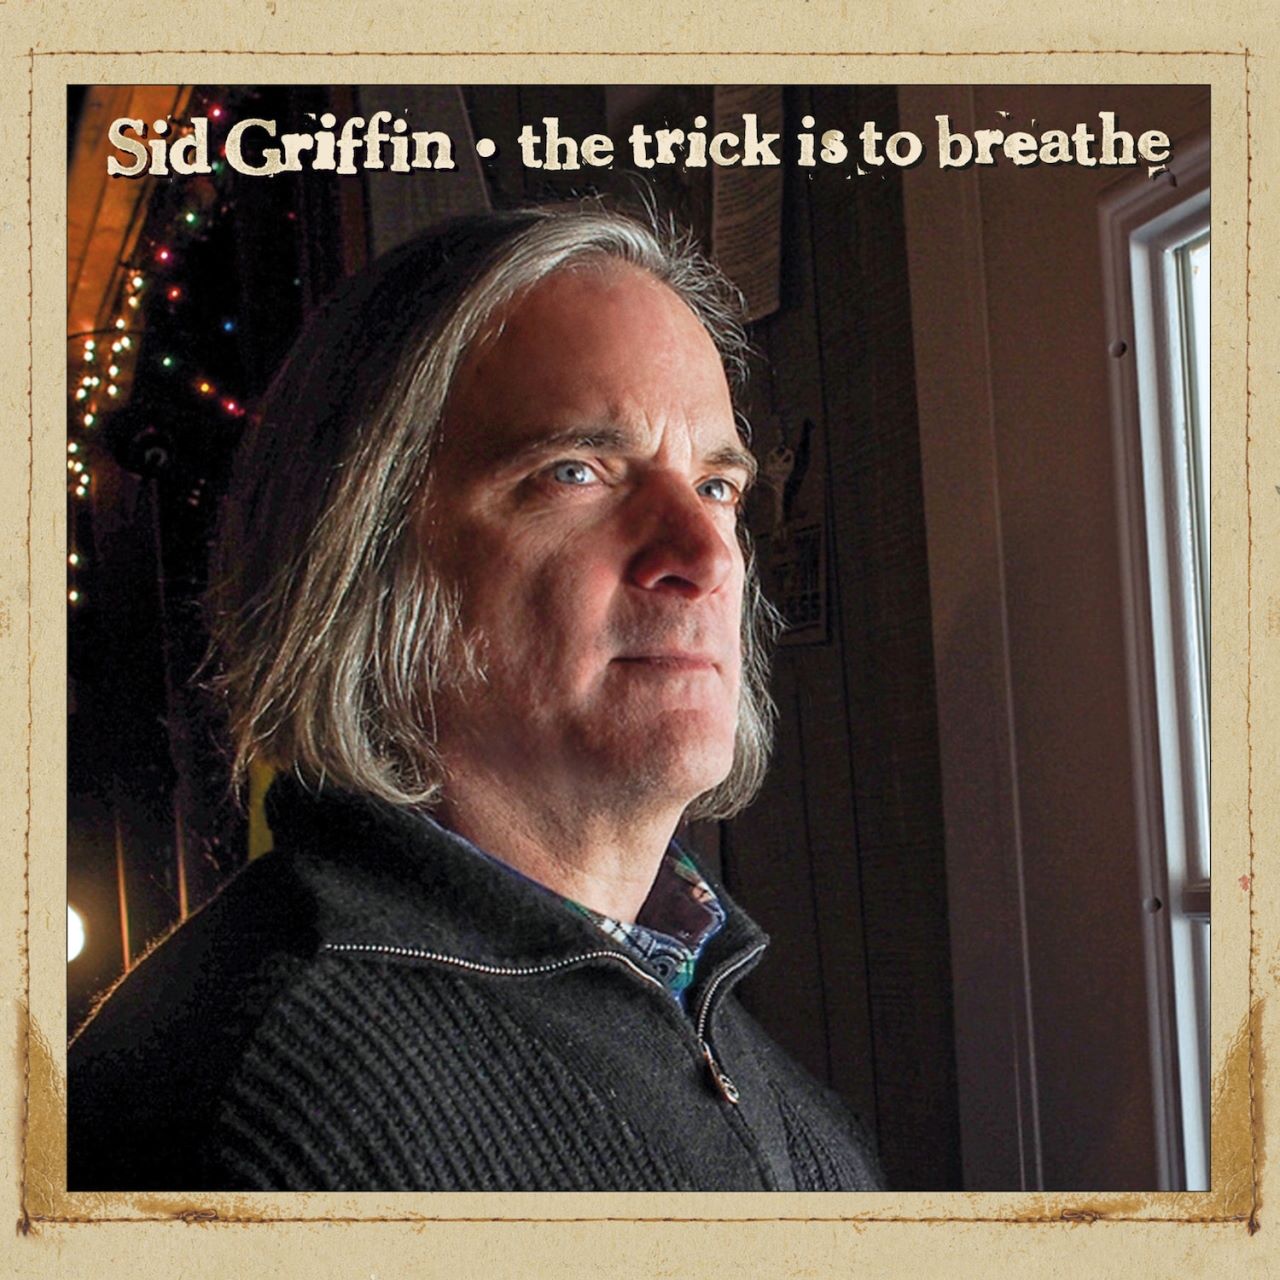 Sid Griffin - The Trick Is To Breathe cover album